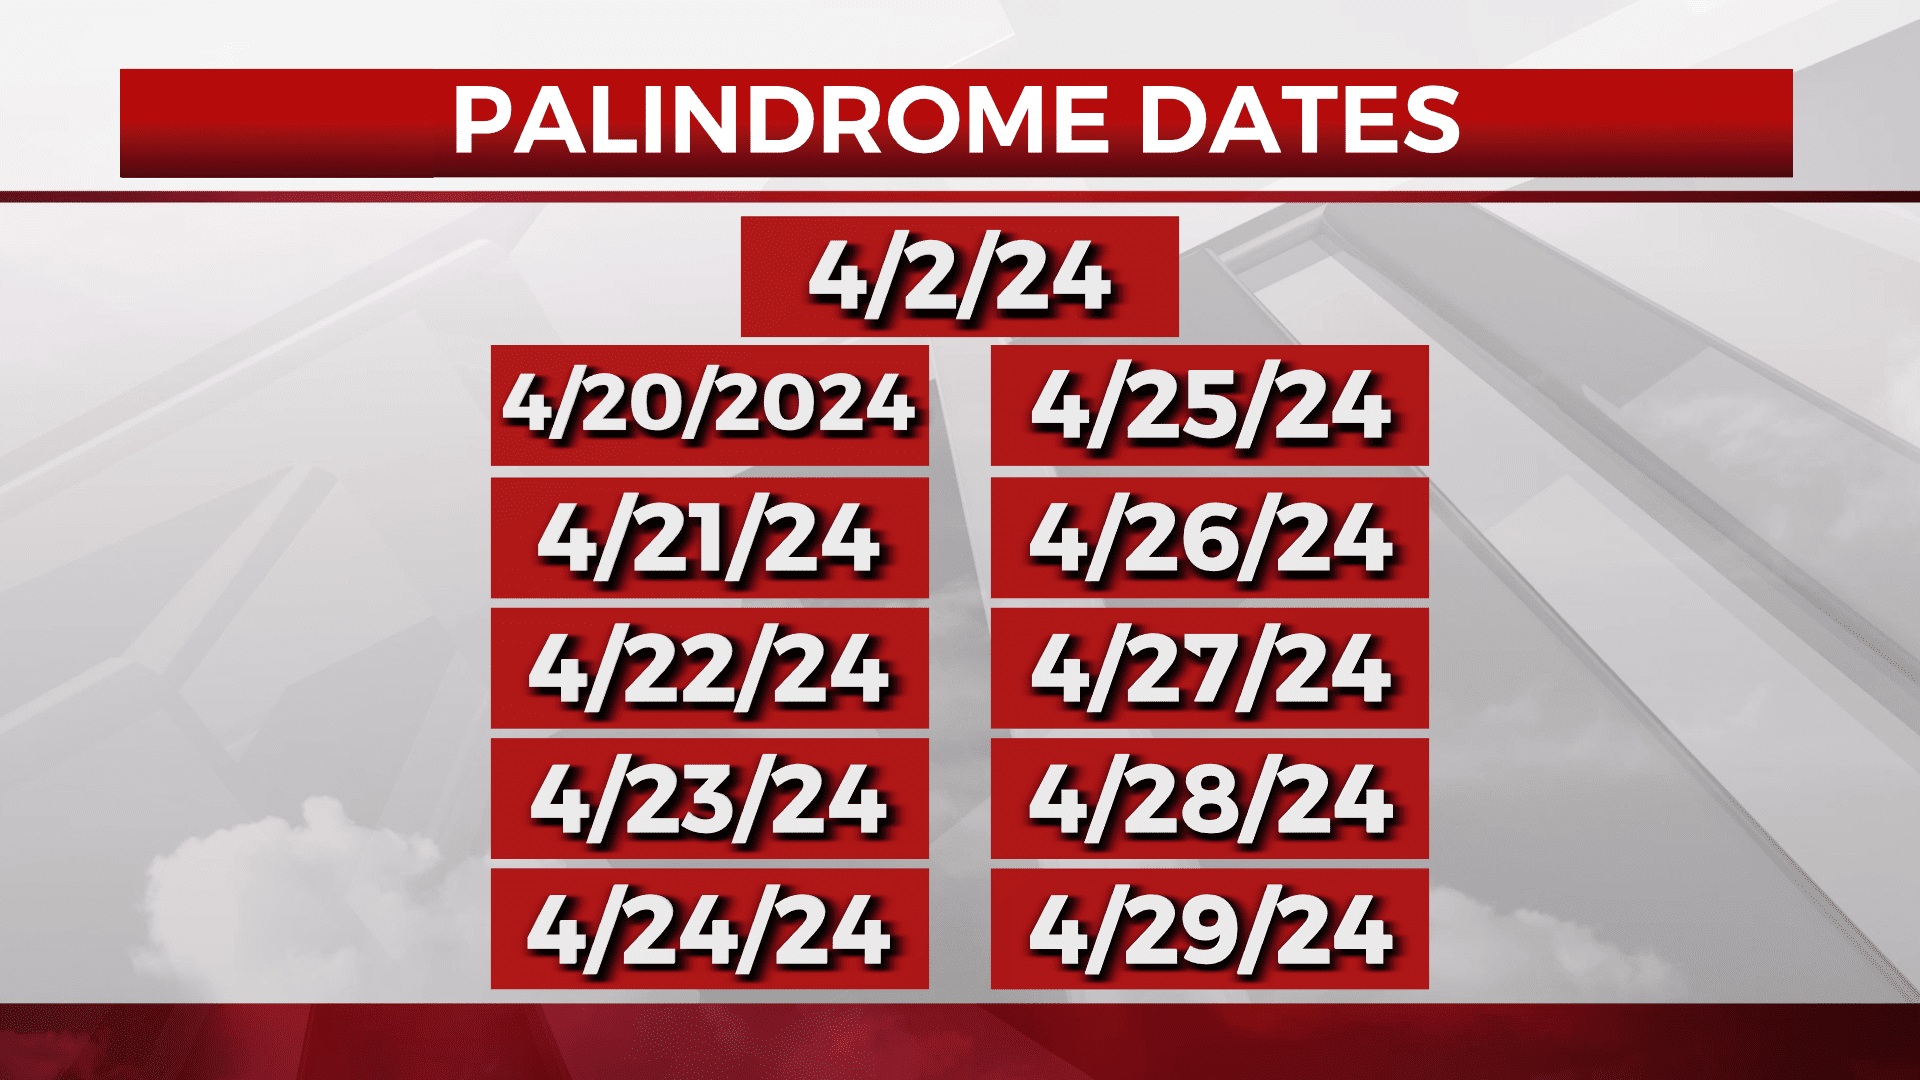 List of palindrome dates